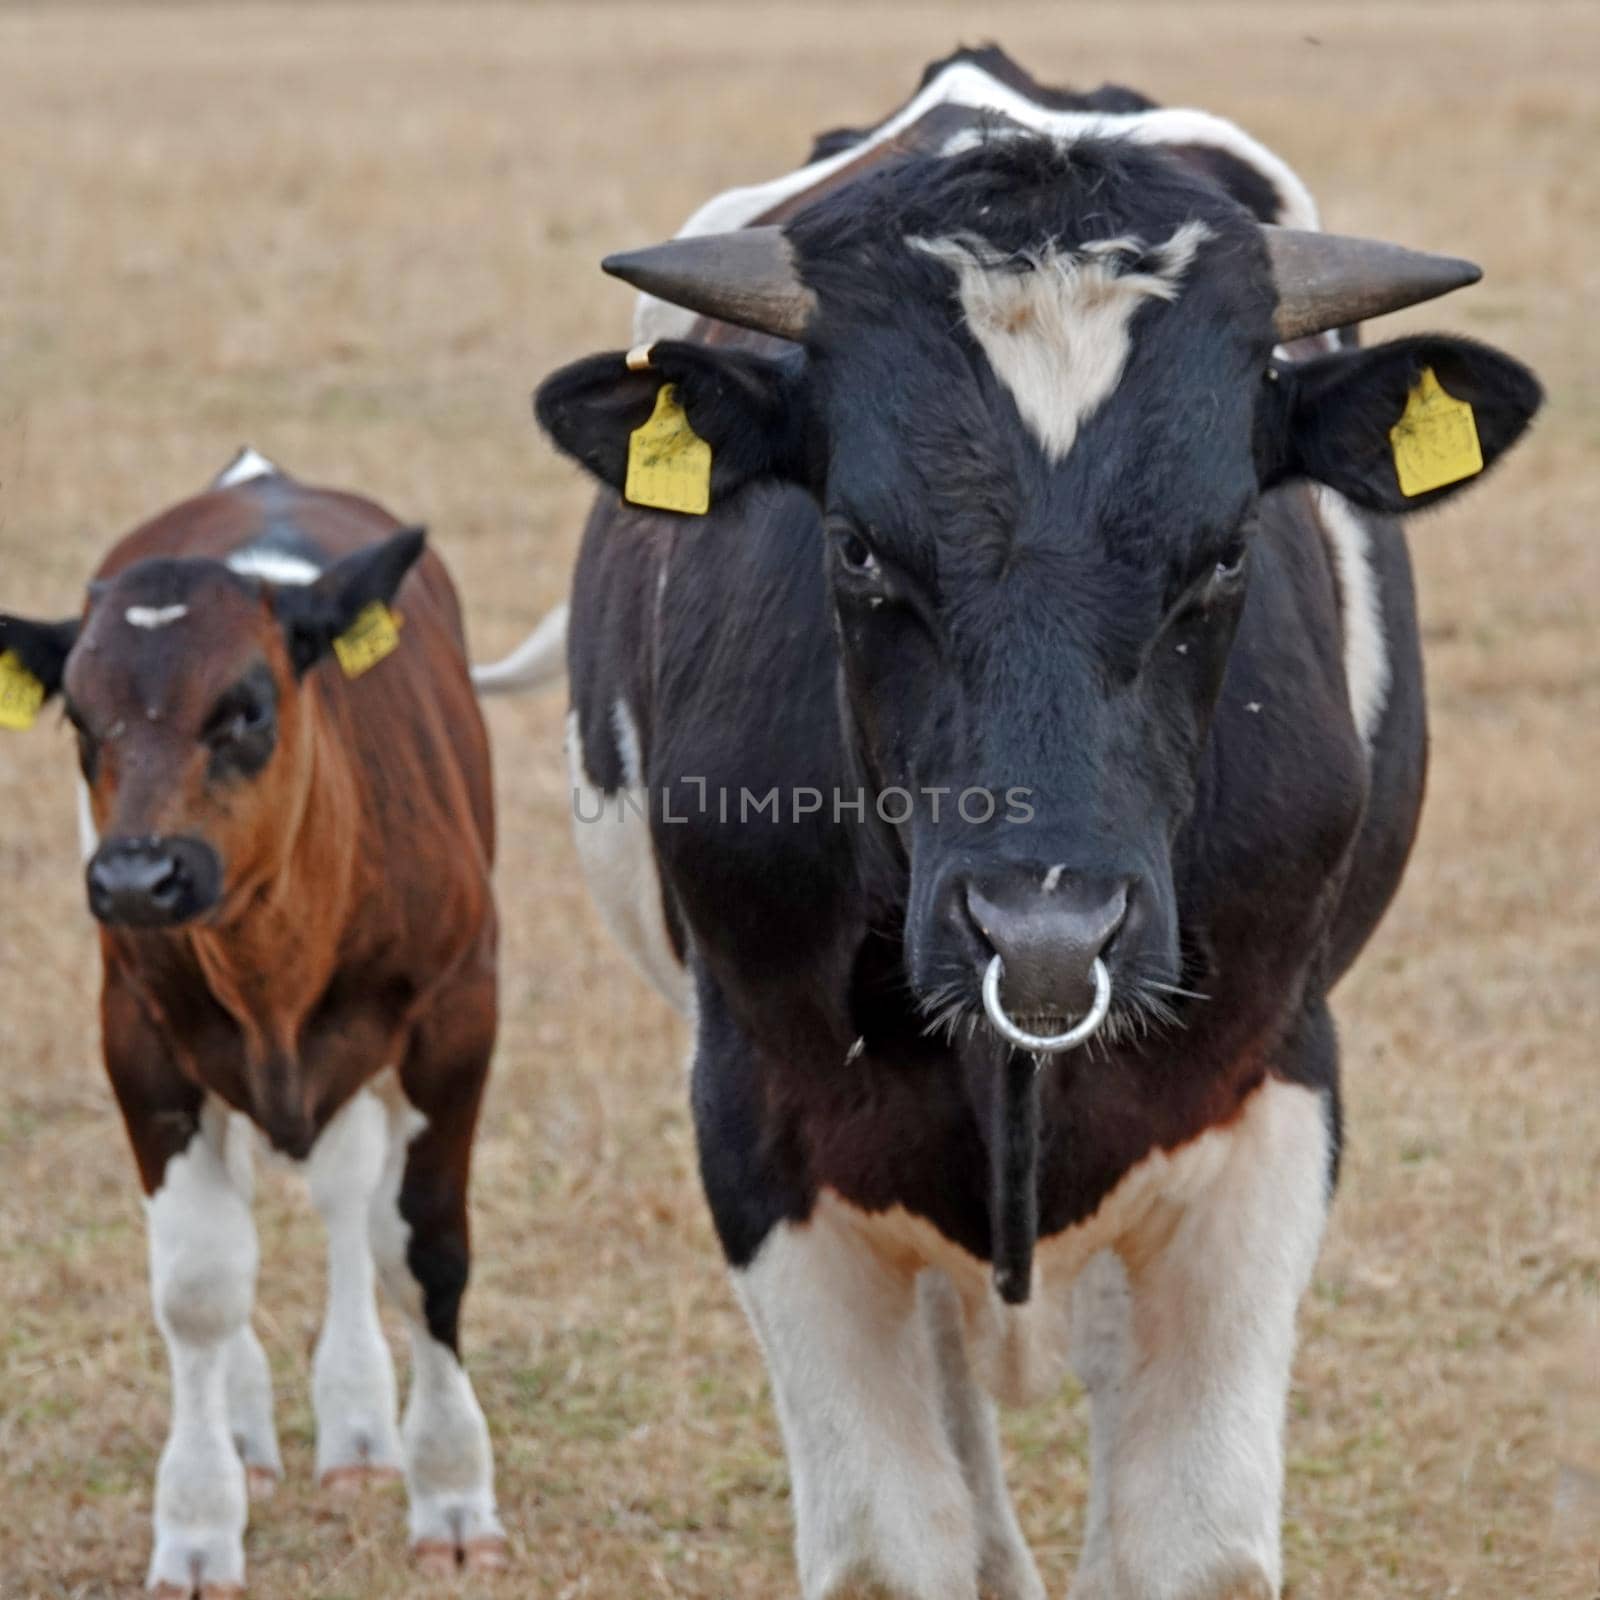 Father and son Holstein-Frisian cattle by WielandTeixeira